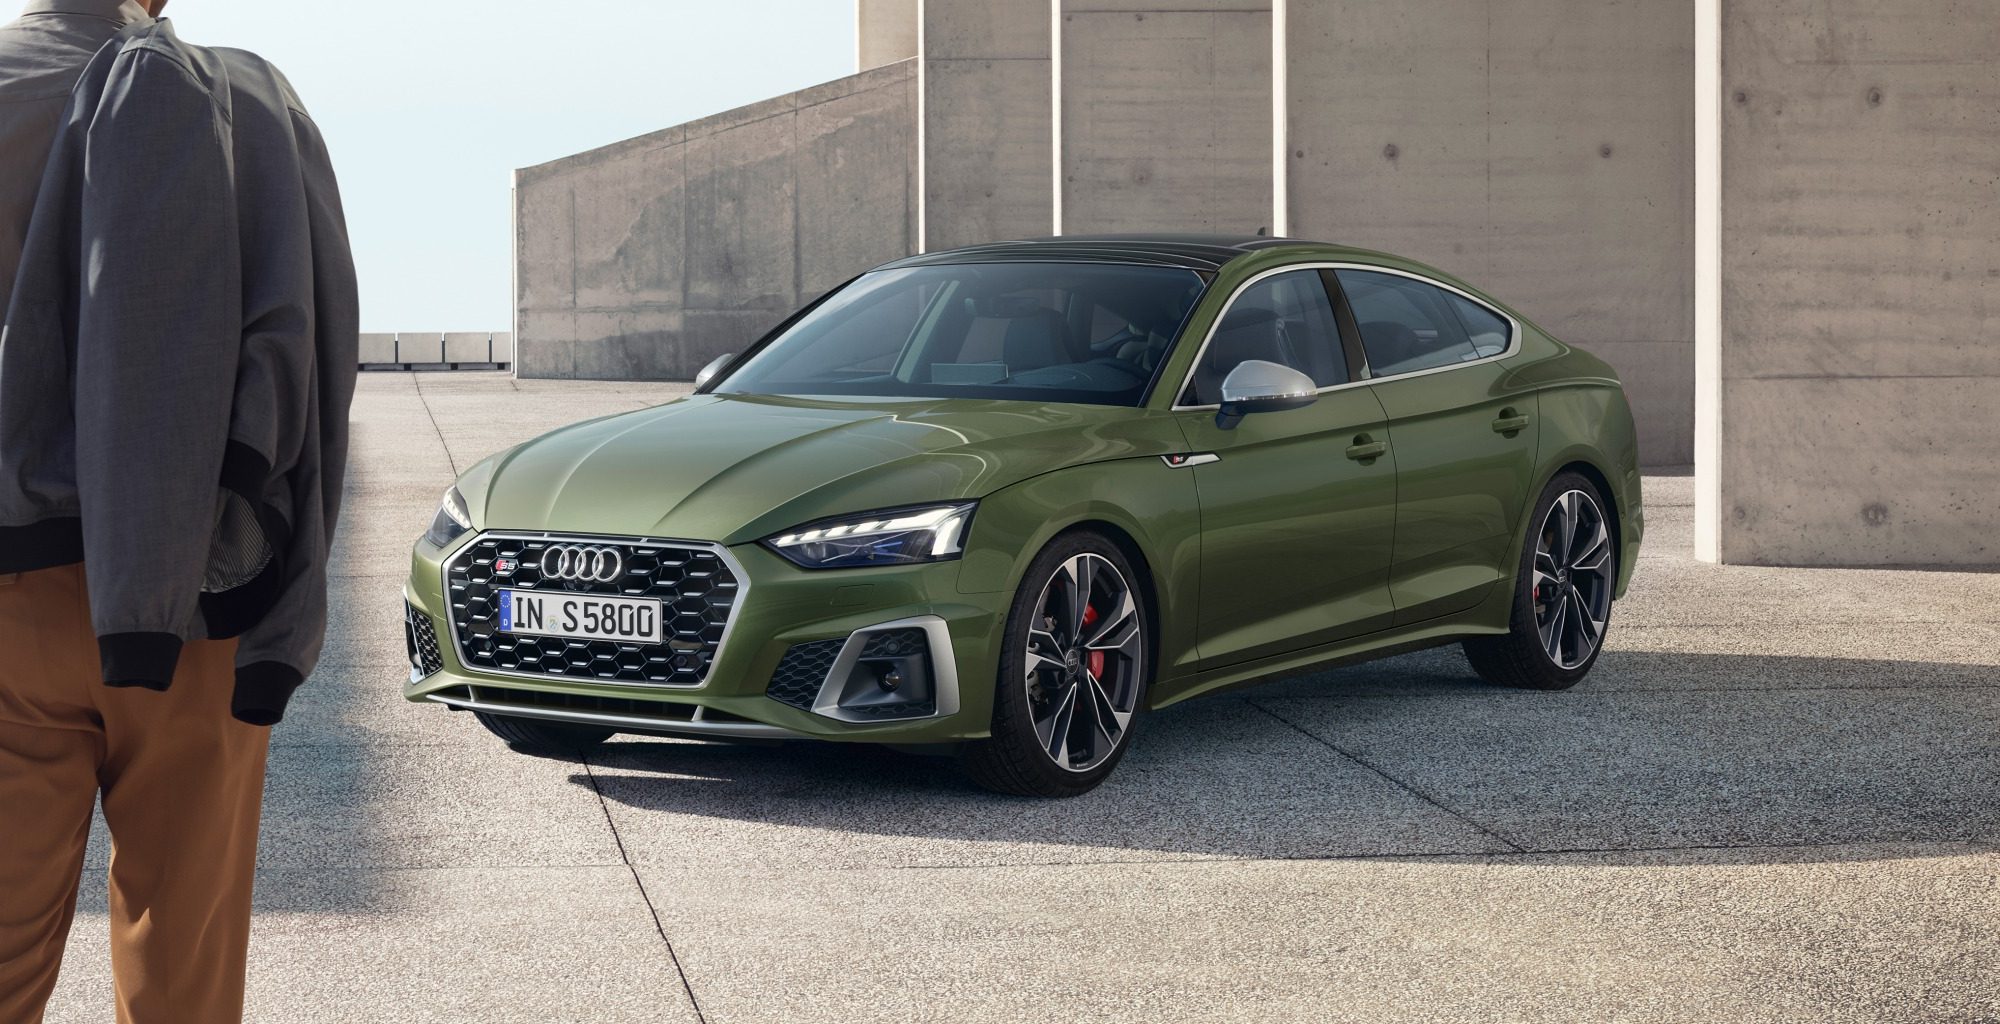 Dark olive green Audi S5 Sportback in an urban setting with a man standing to the side